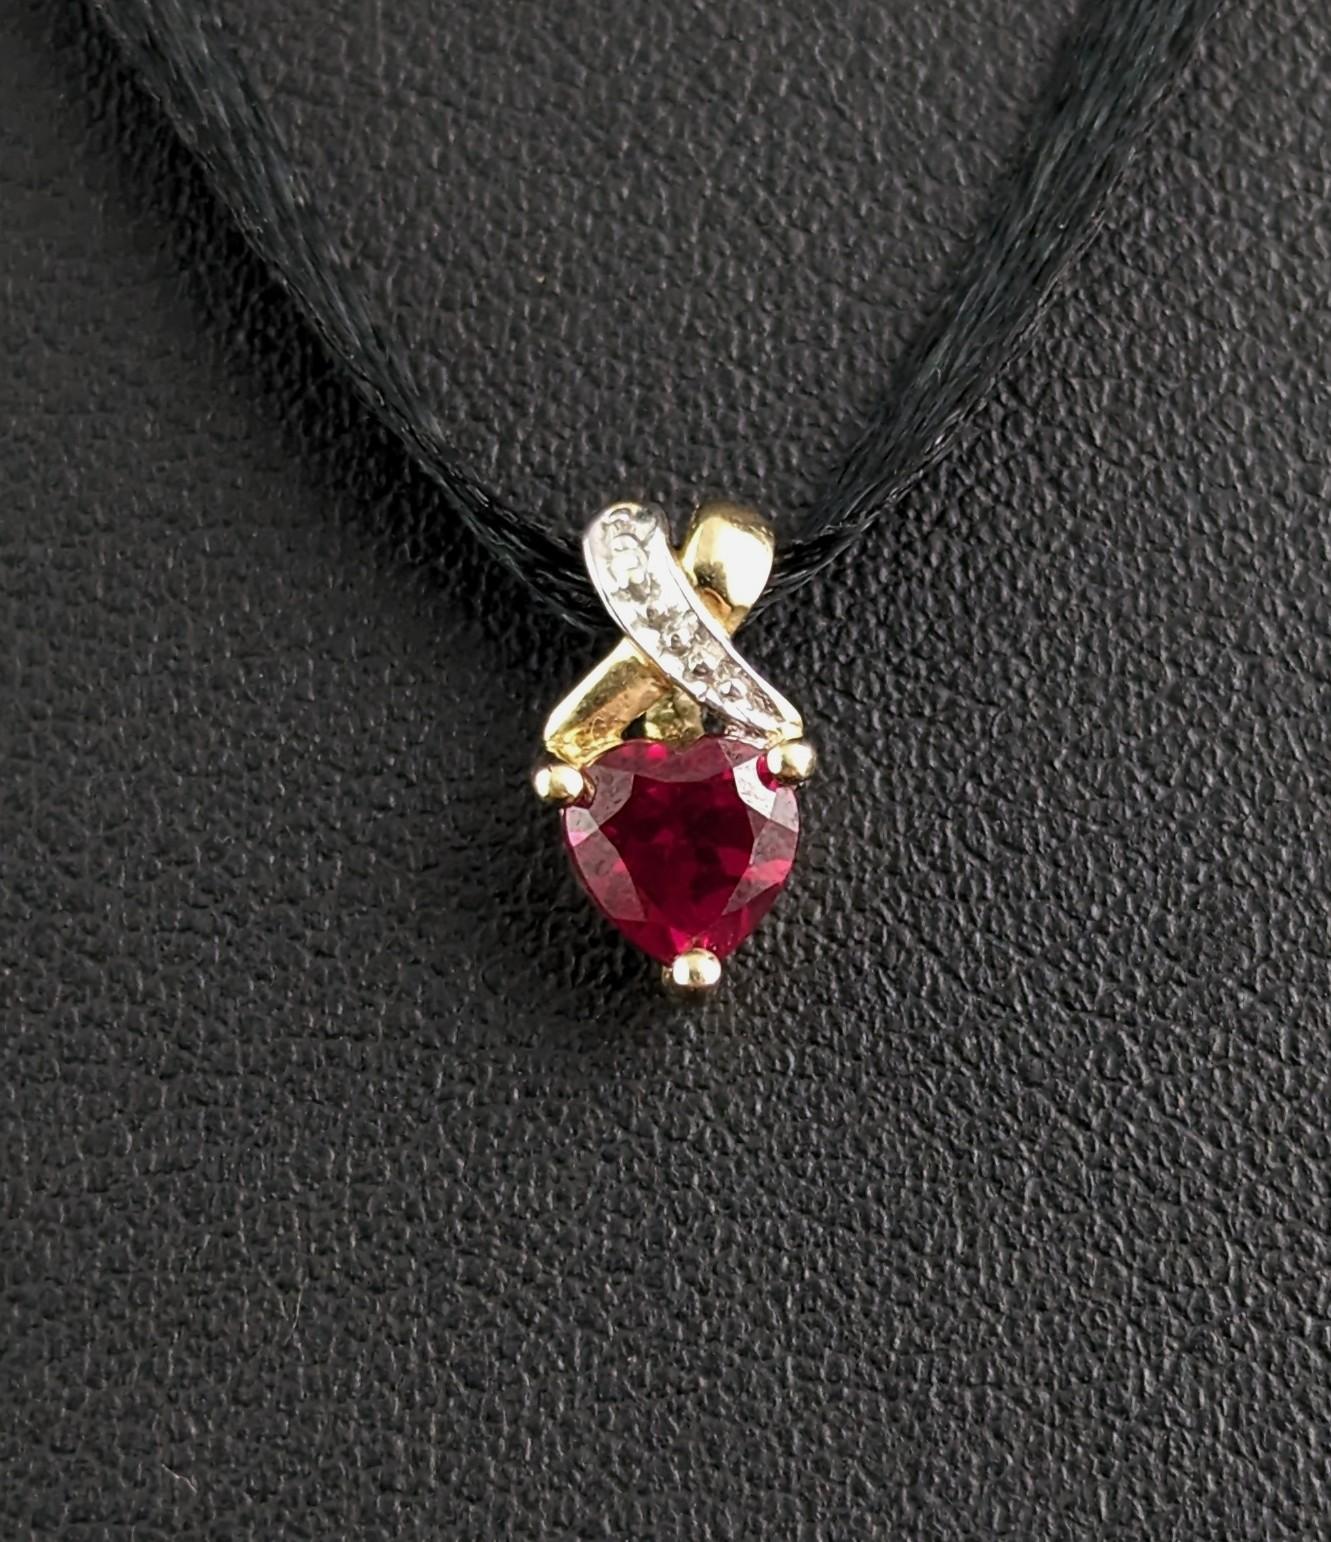 The sweetest teeny tiny, vintage Synthetic Ruby and Diamond heart shaped pendant in 9ct yellow gold.

The ruby has a deep red pink hue and is cut in a heart shape, above the Ruby is a scroll of white gold set with tiny diamond chips.

All set into